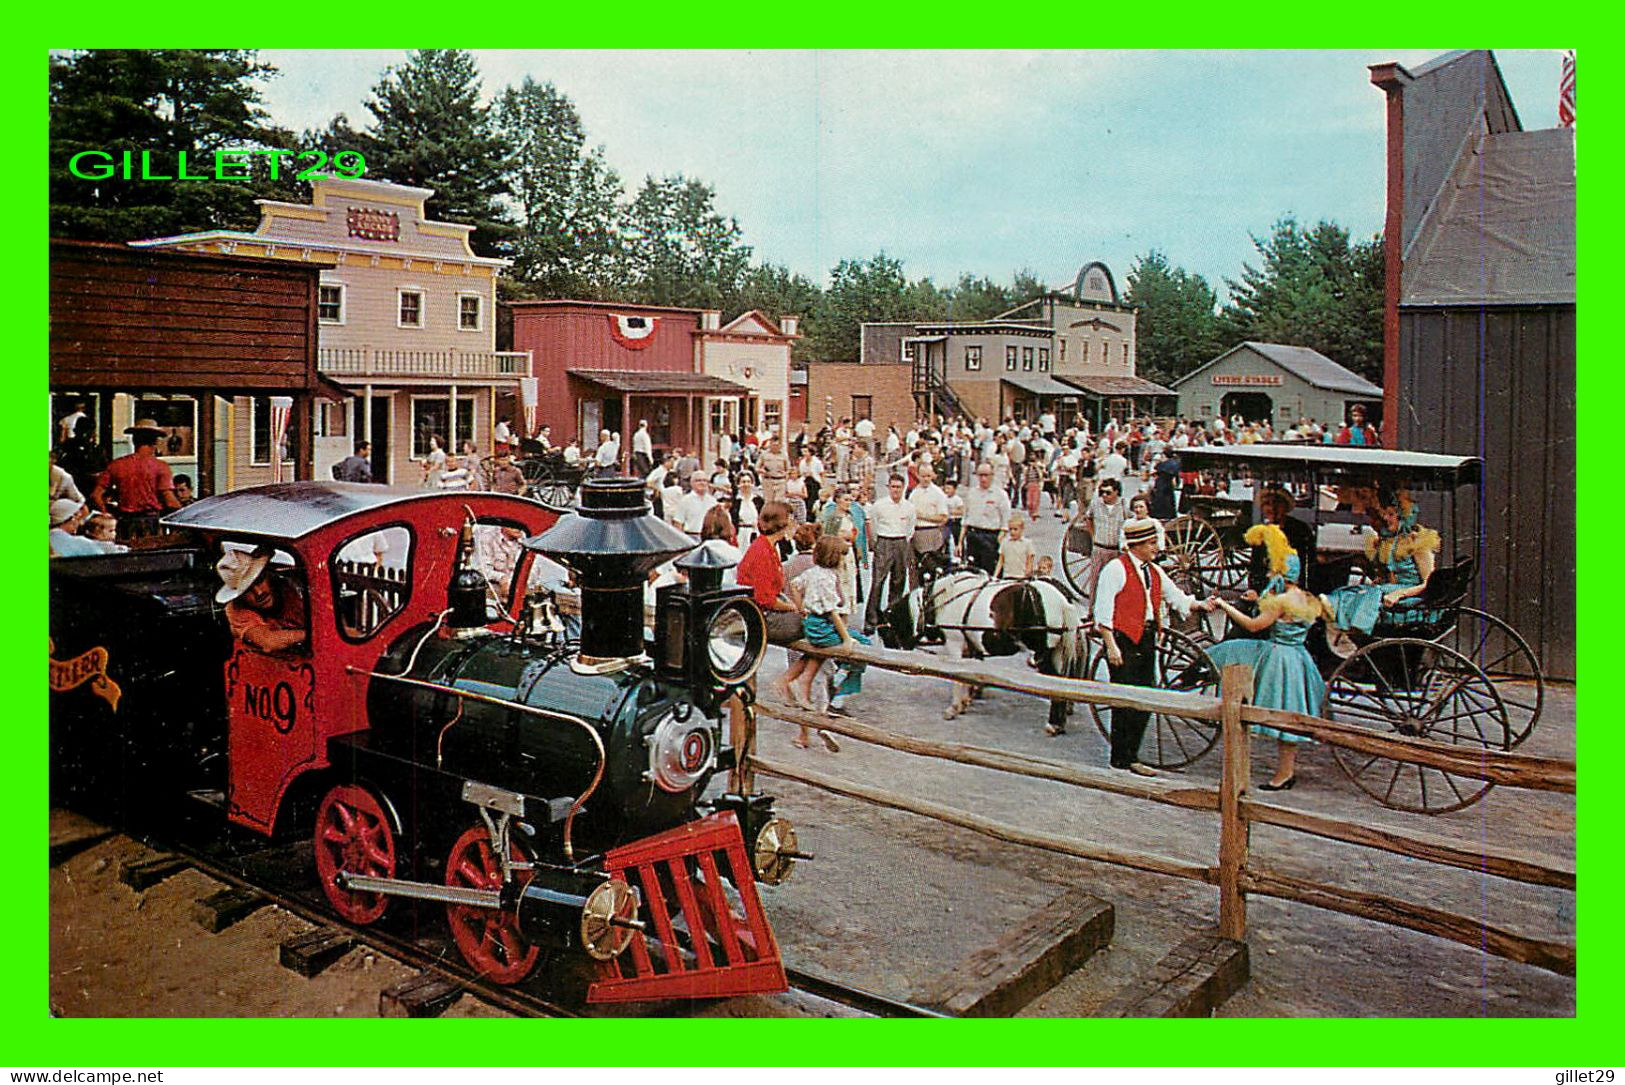 LAKE GEORGE, NY - GHOST TOWN SECTION OF STORYTOWN U.S.A. - DEXTER PRESS INC - MINING ORE TRAIN - - Lake George